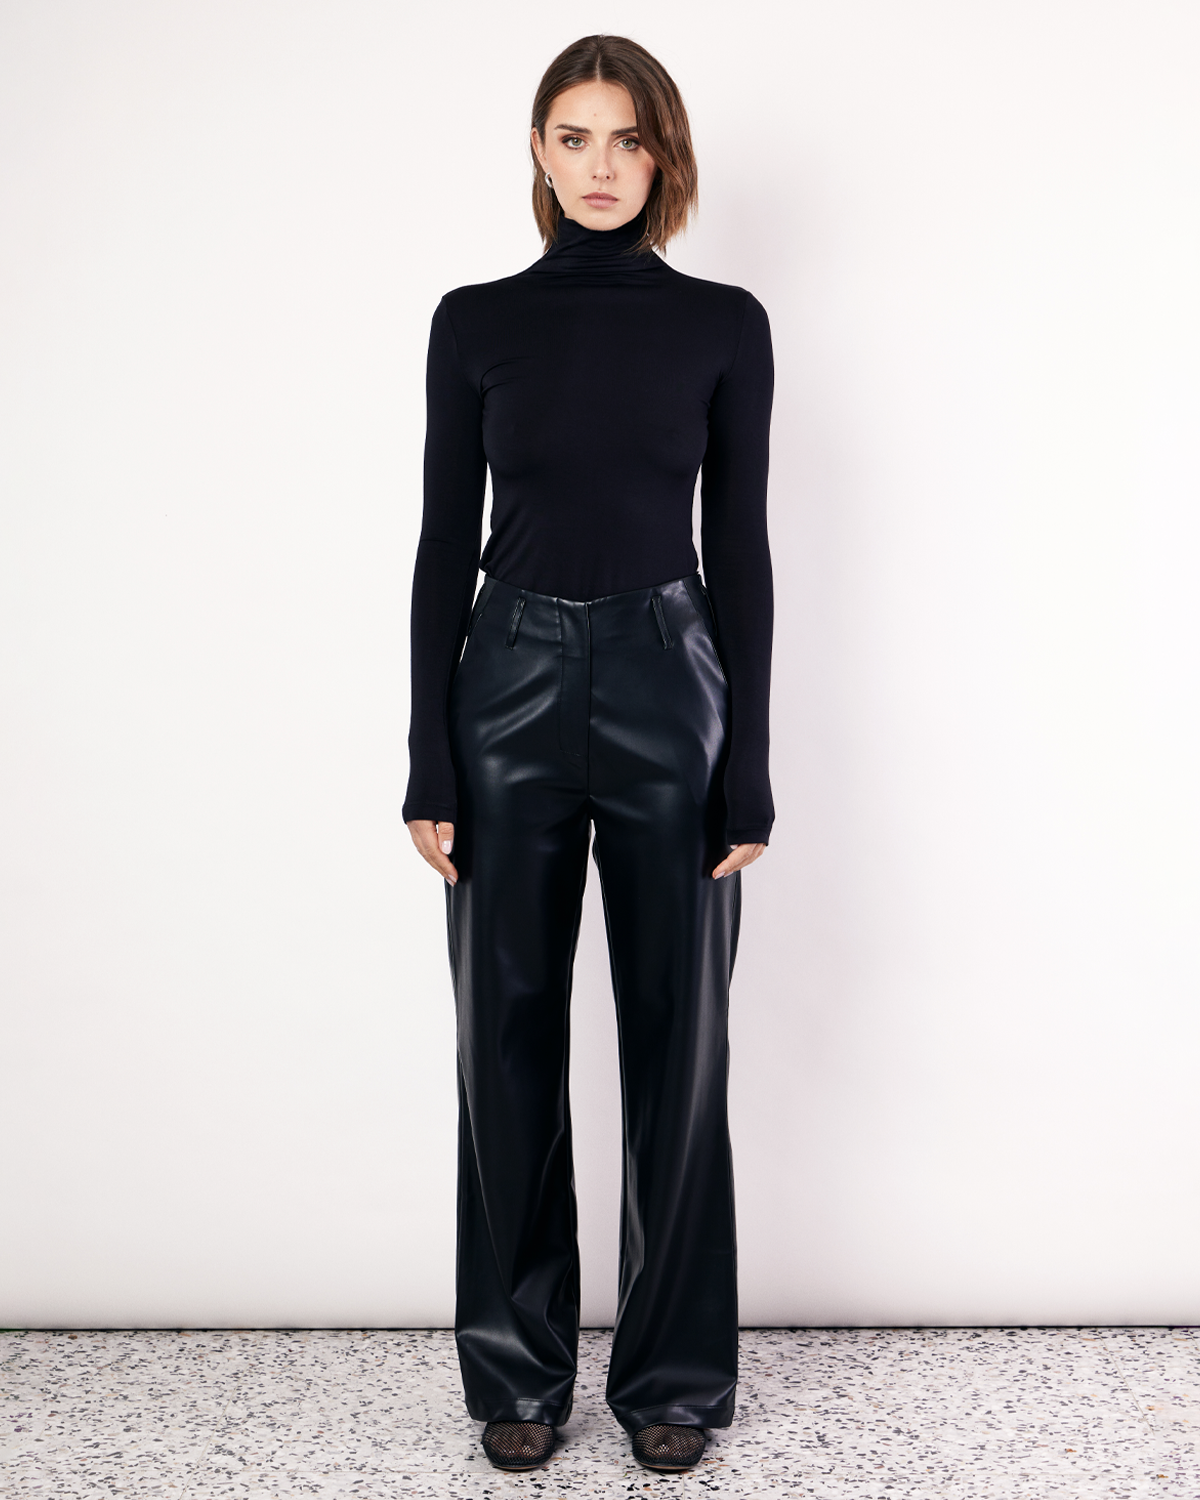 The Vegan Leather Pant are a mid-rise straight leg pant, featuring pockets, belt loops and a hidden clasp closure. They are crafted from a buttery soft Vegan Leather fabrication in Black. Now available at Romy. 